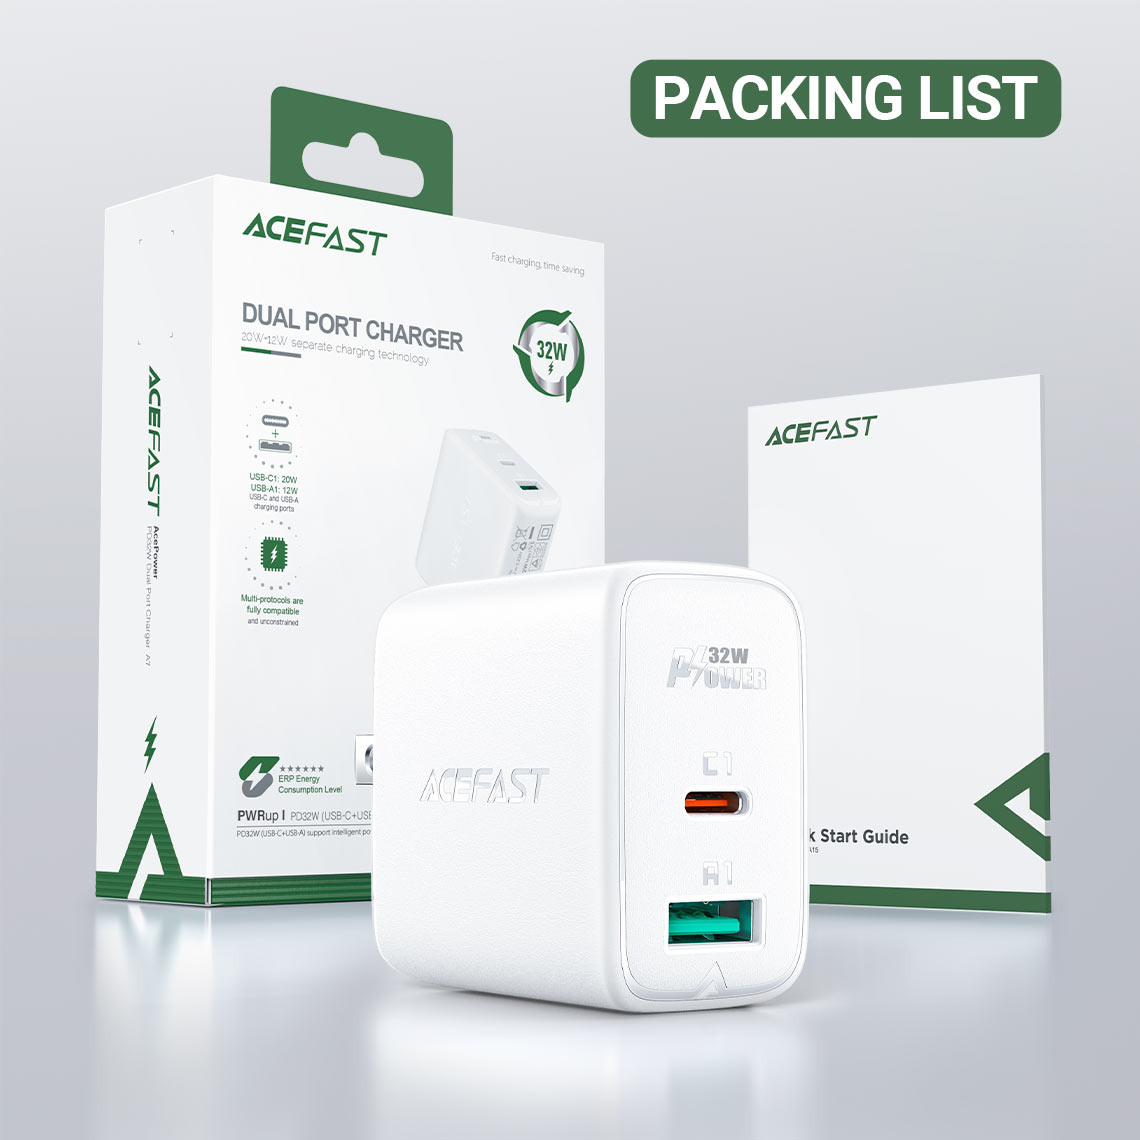 acefast a7 32w wall charger packing list